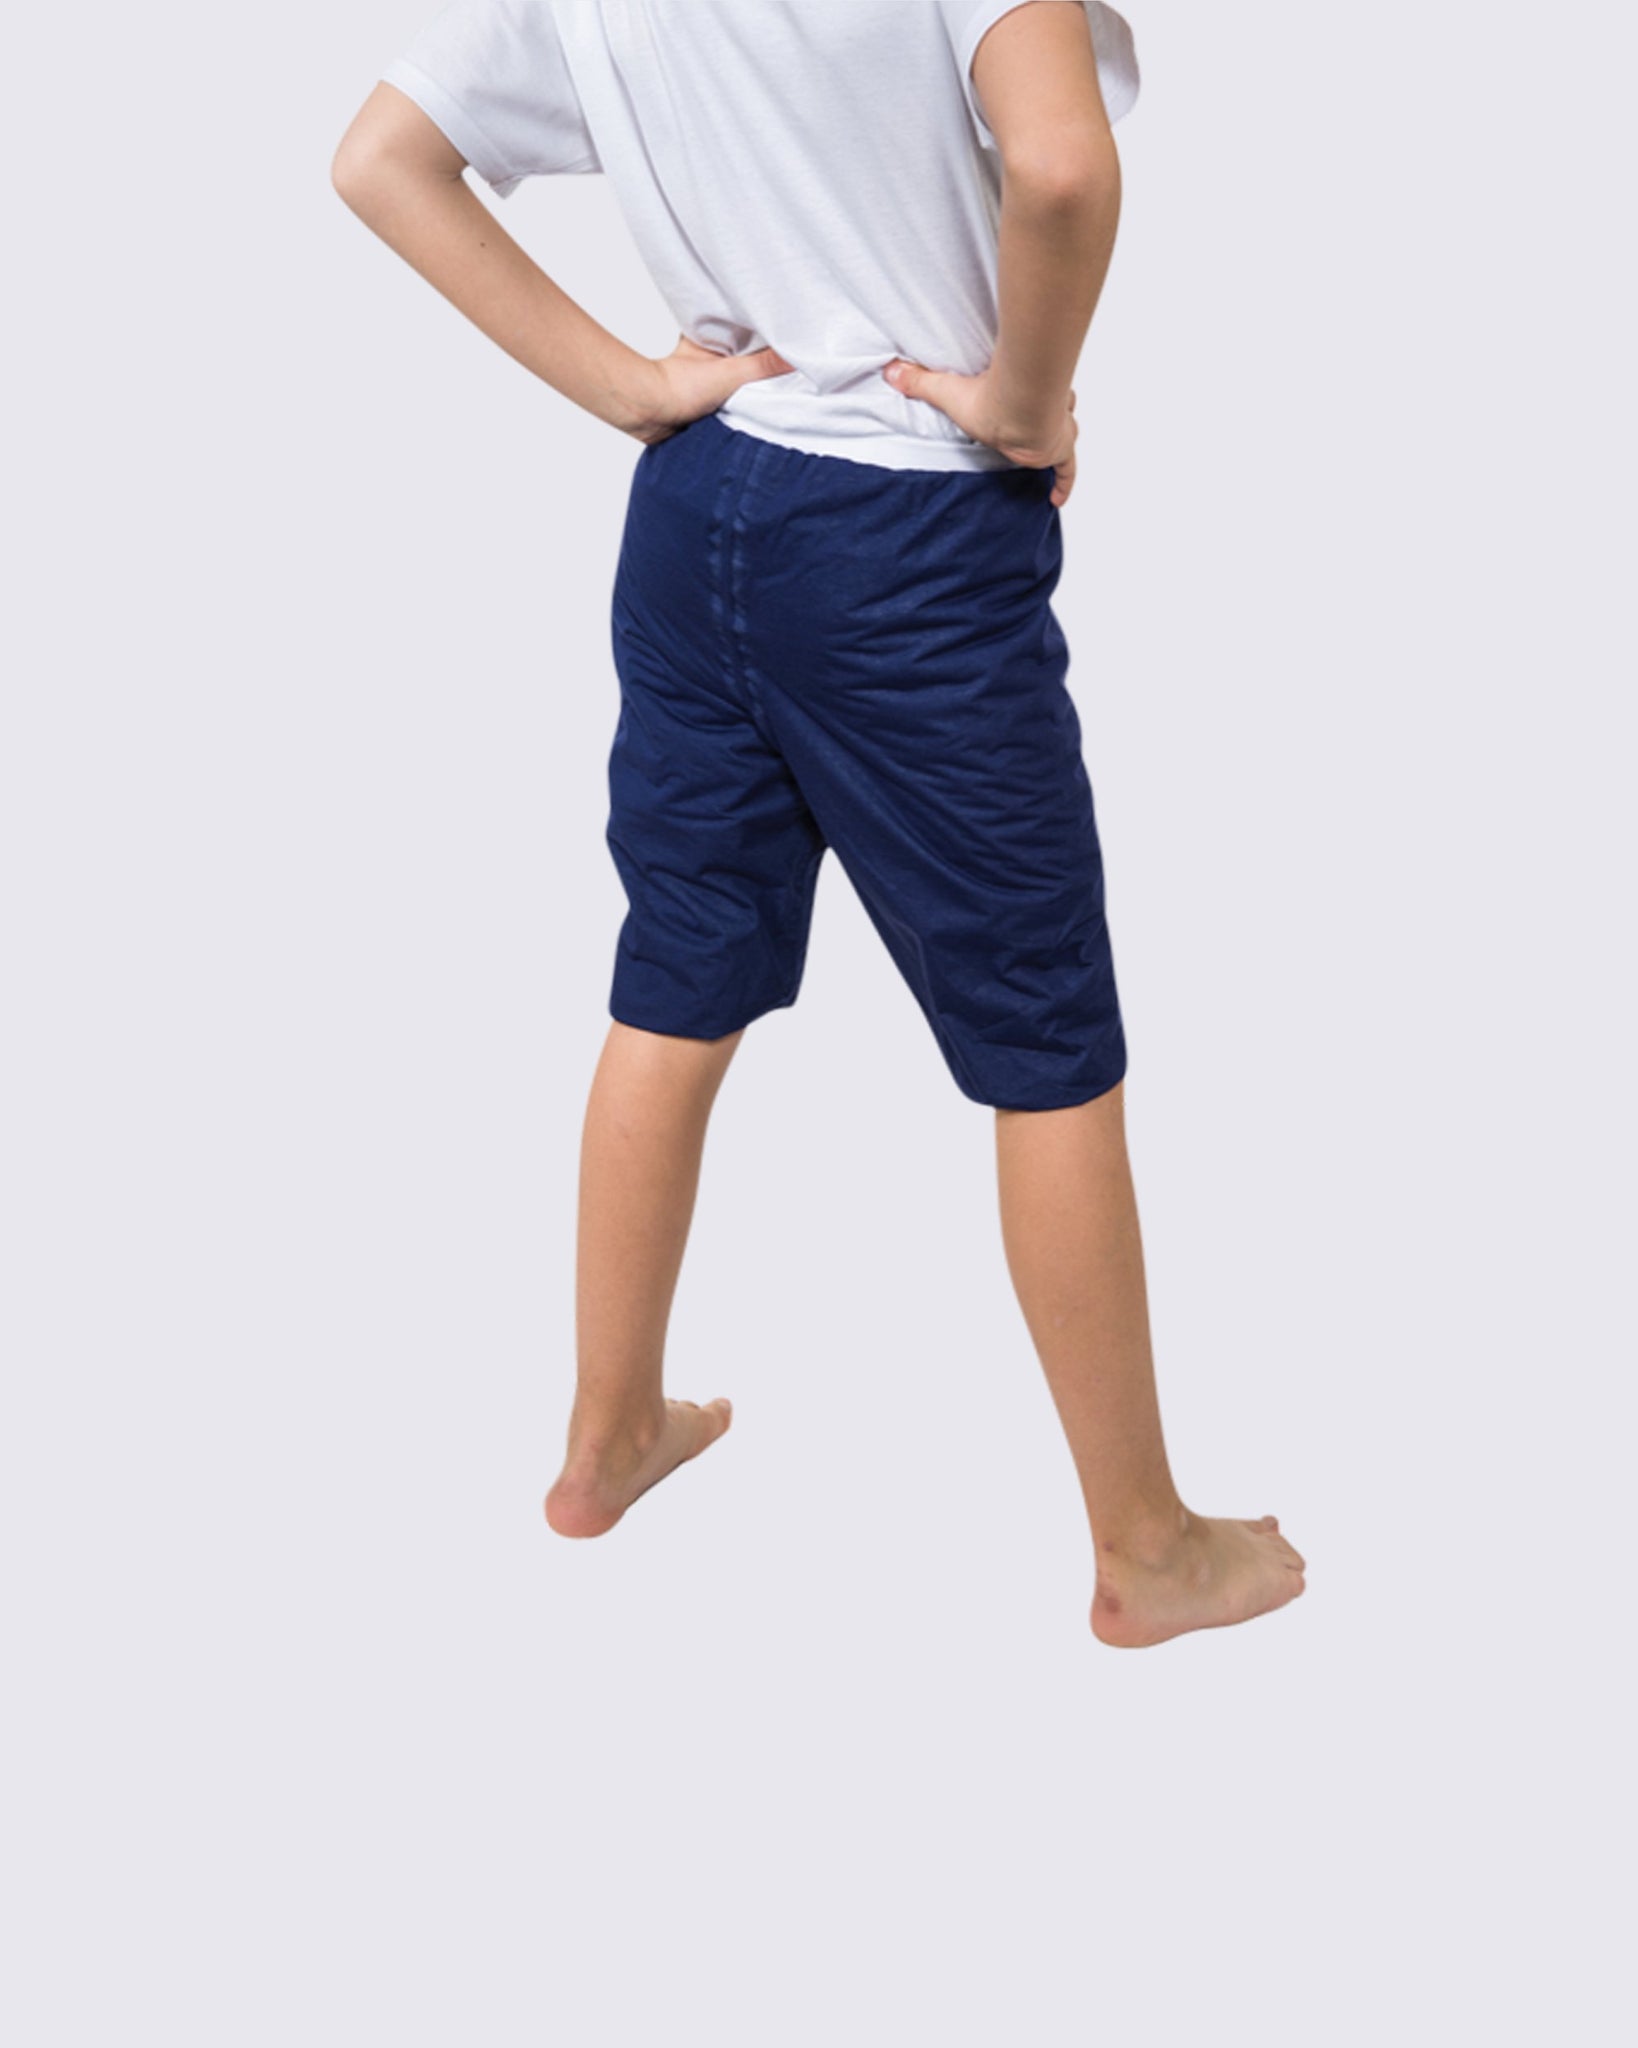 Continence Aid (Kids) - Shorts